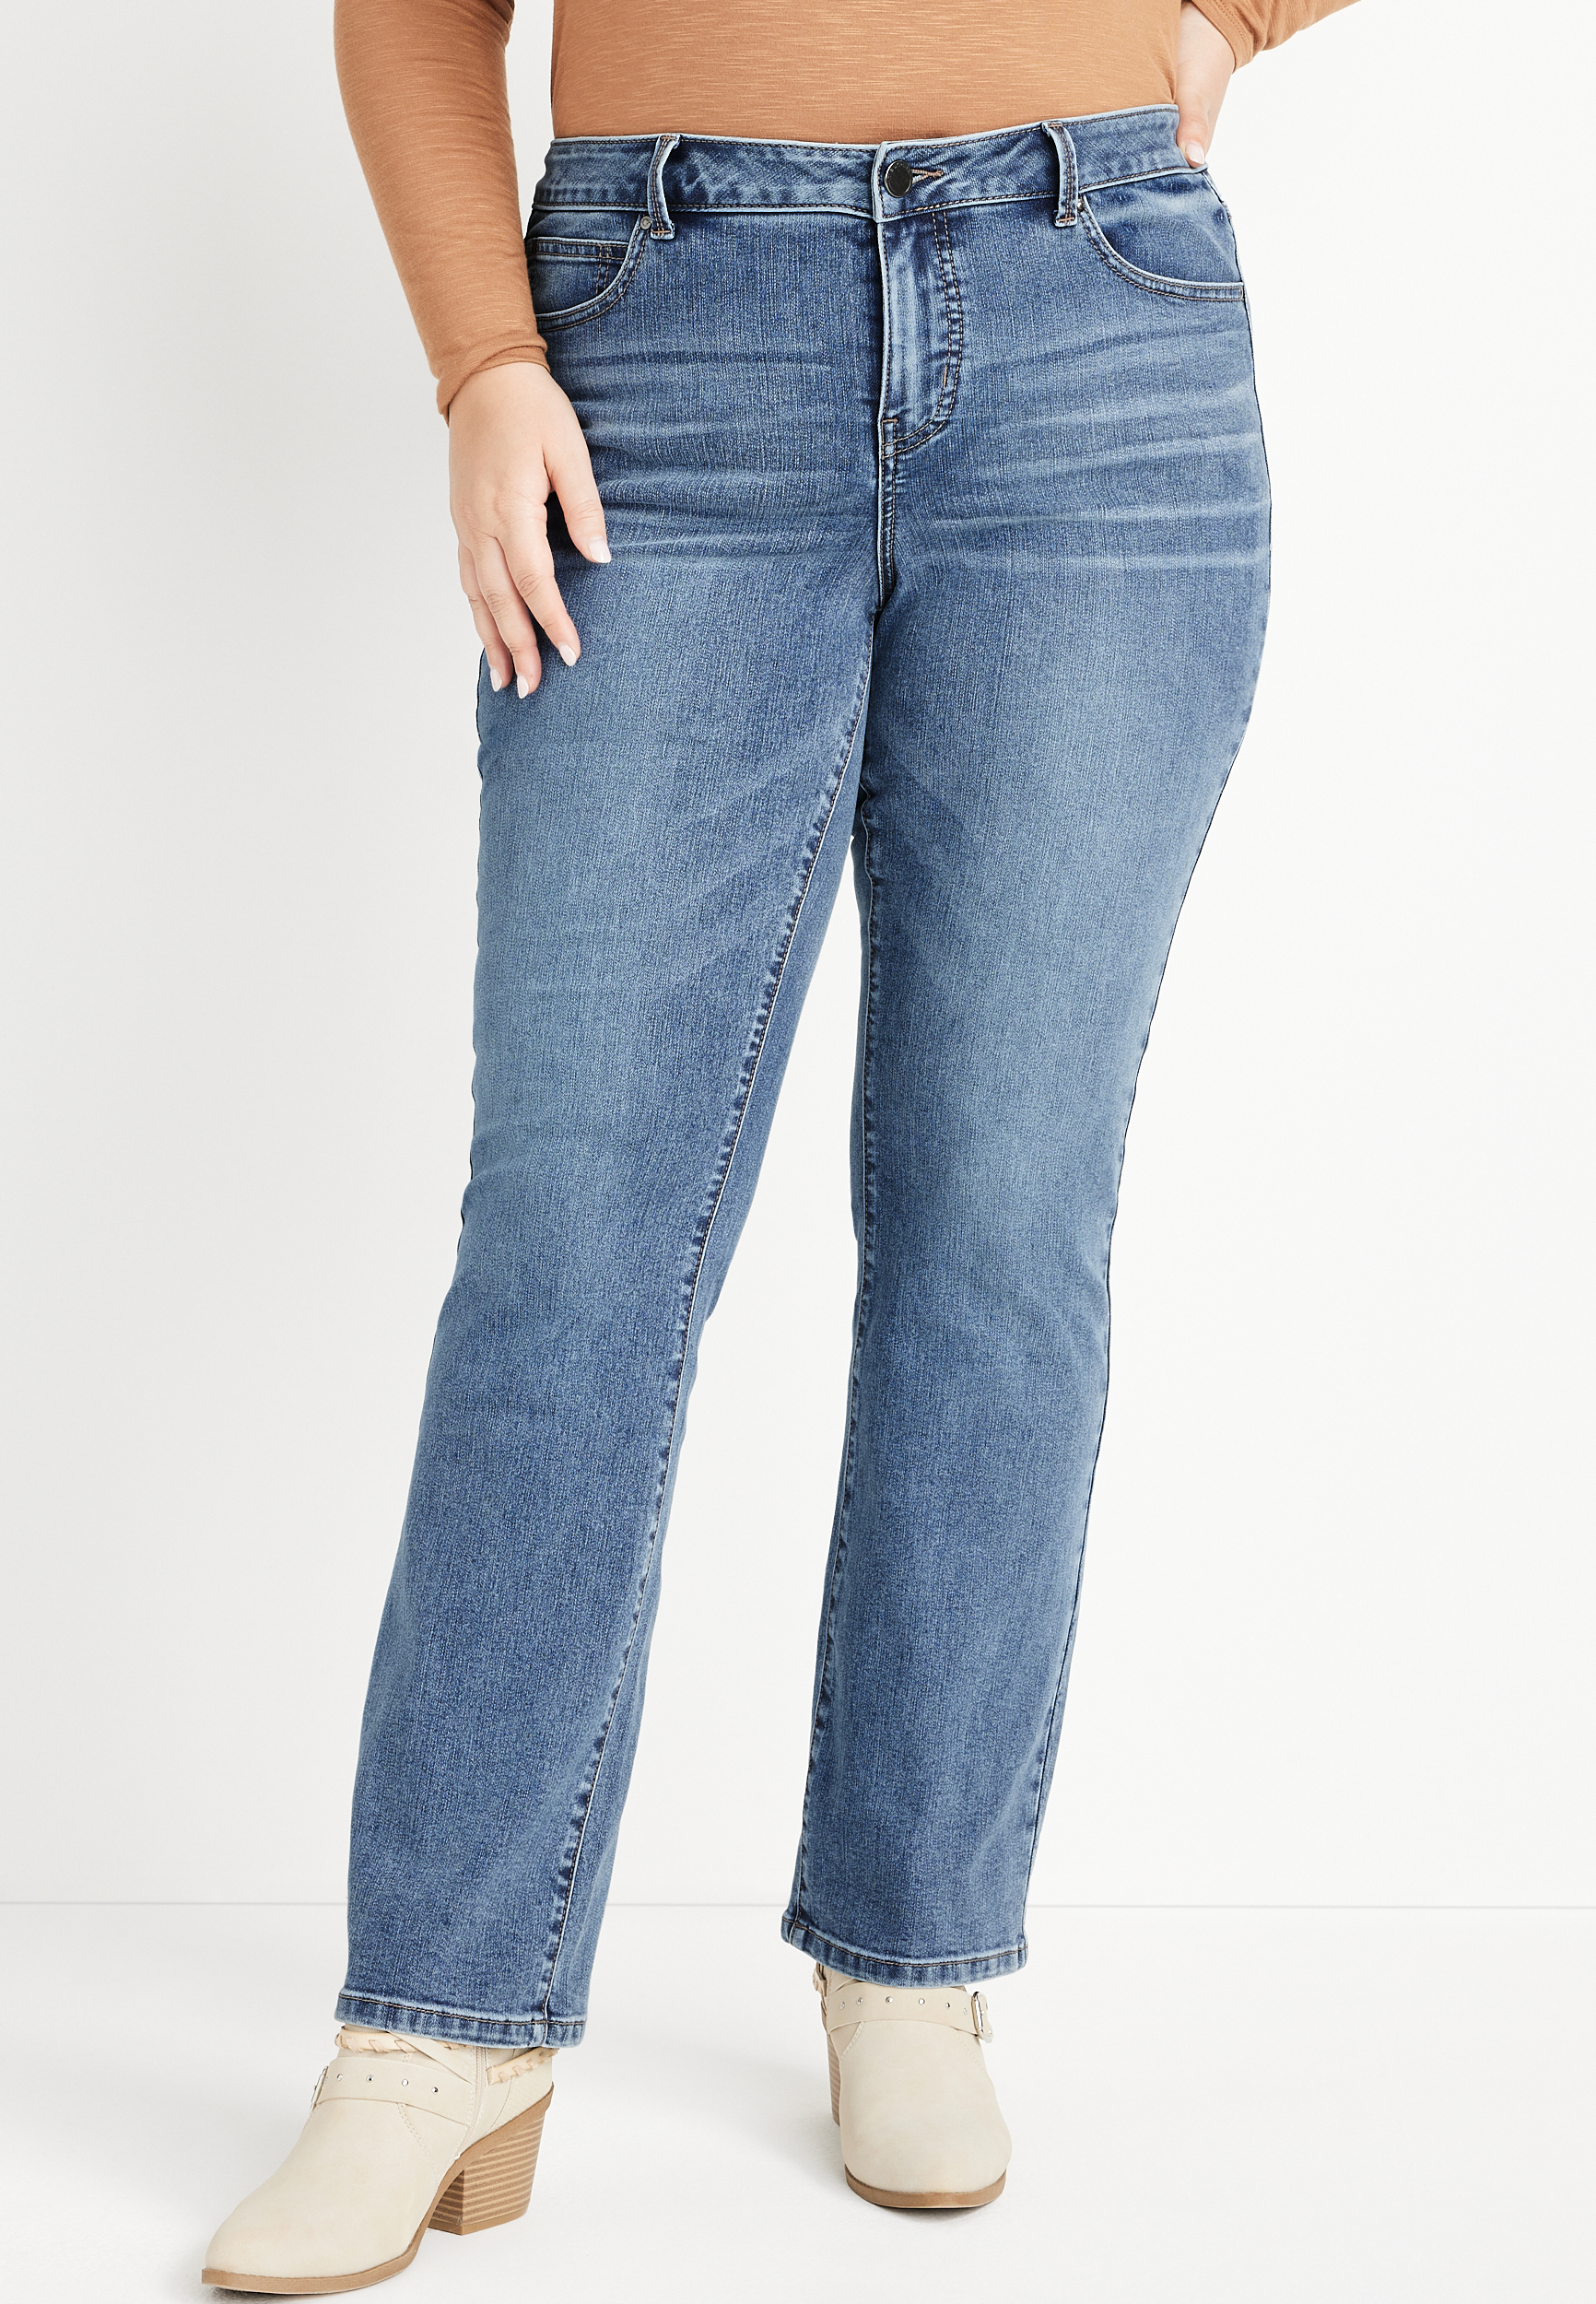 Plus Size m jeans by maurices™ Everflex™ Slim Boot Mid Rise Jean | maurices